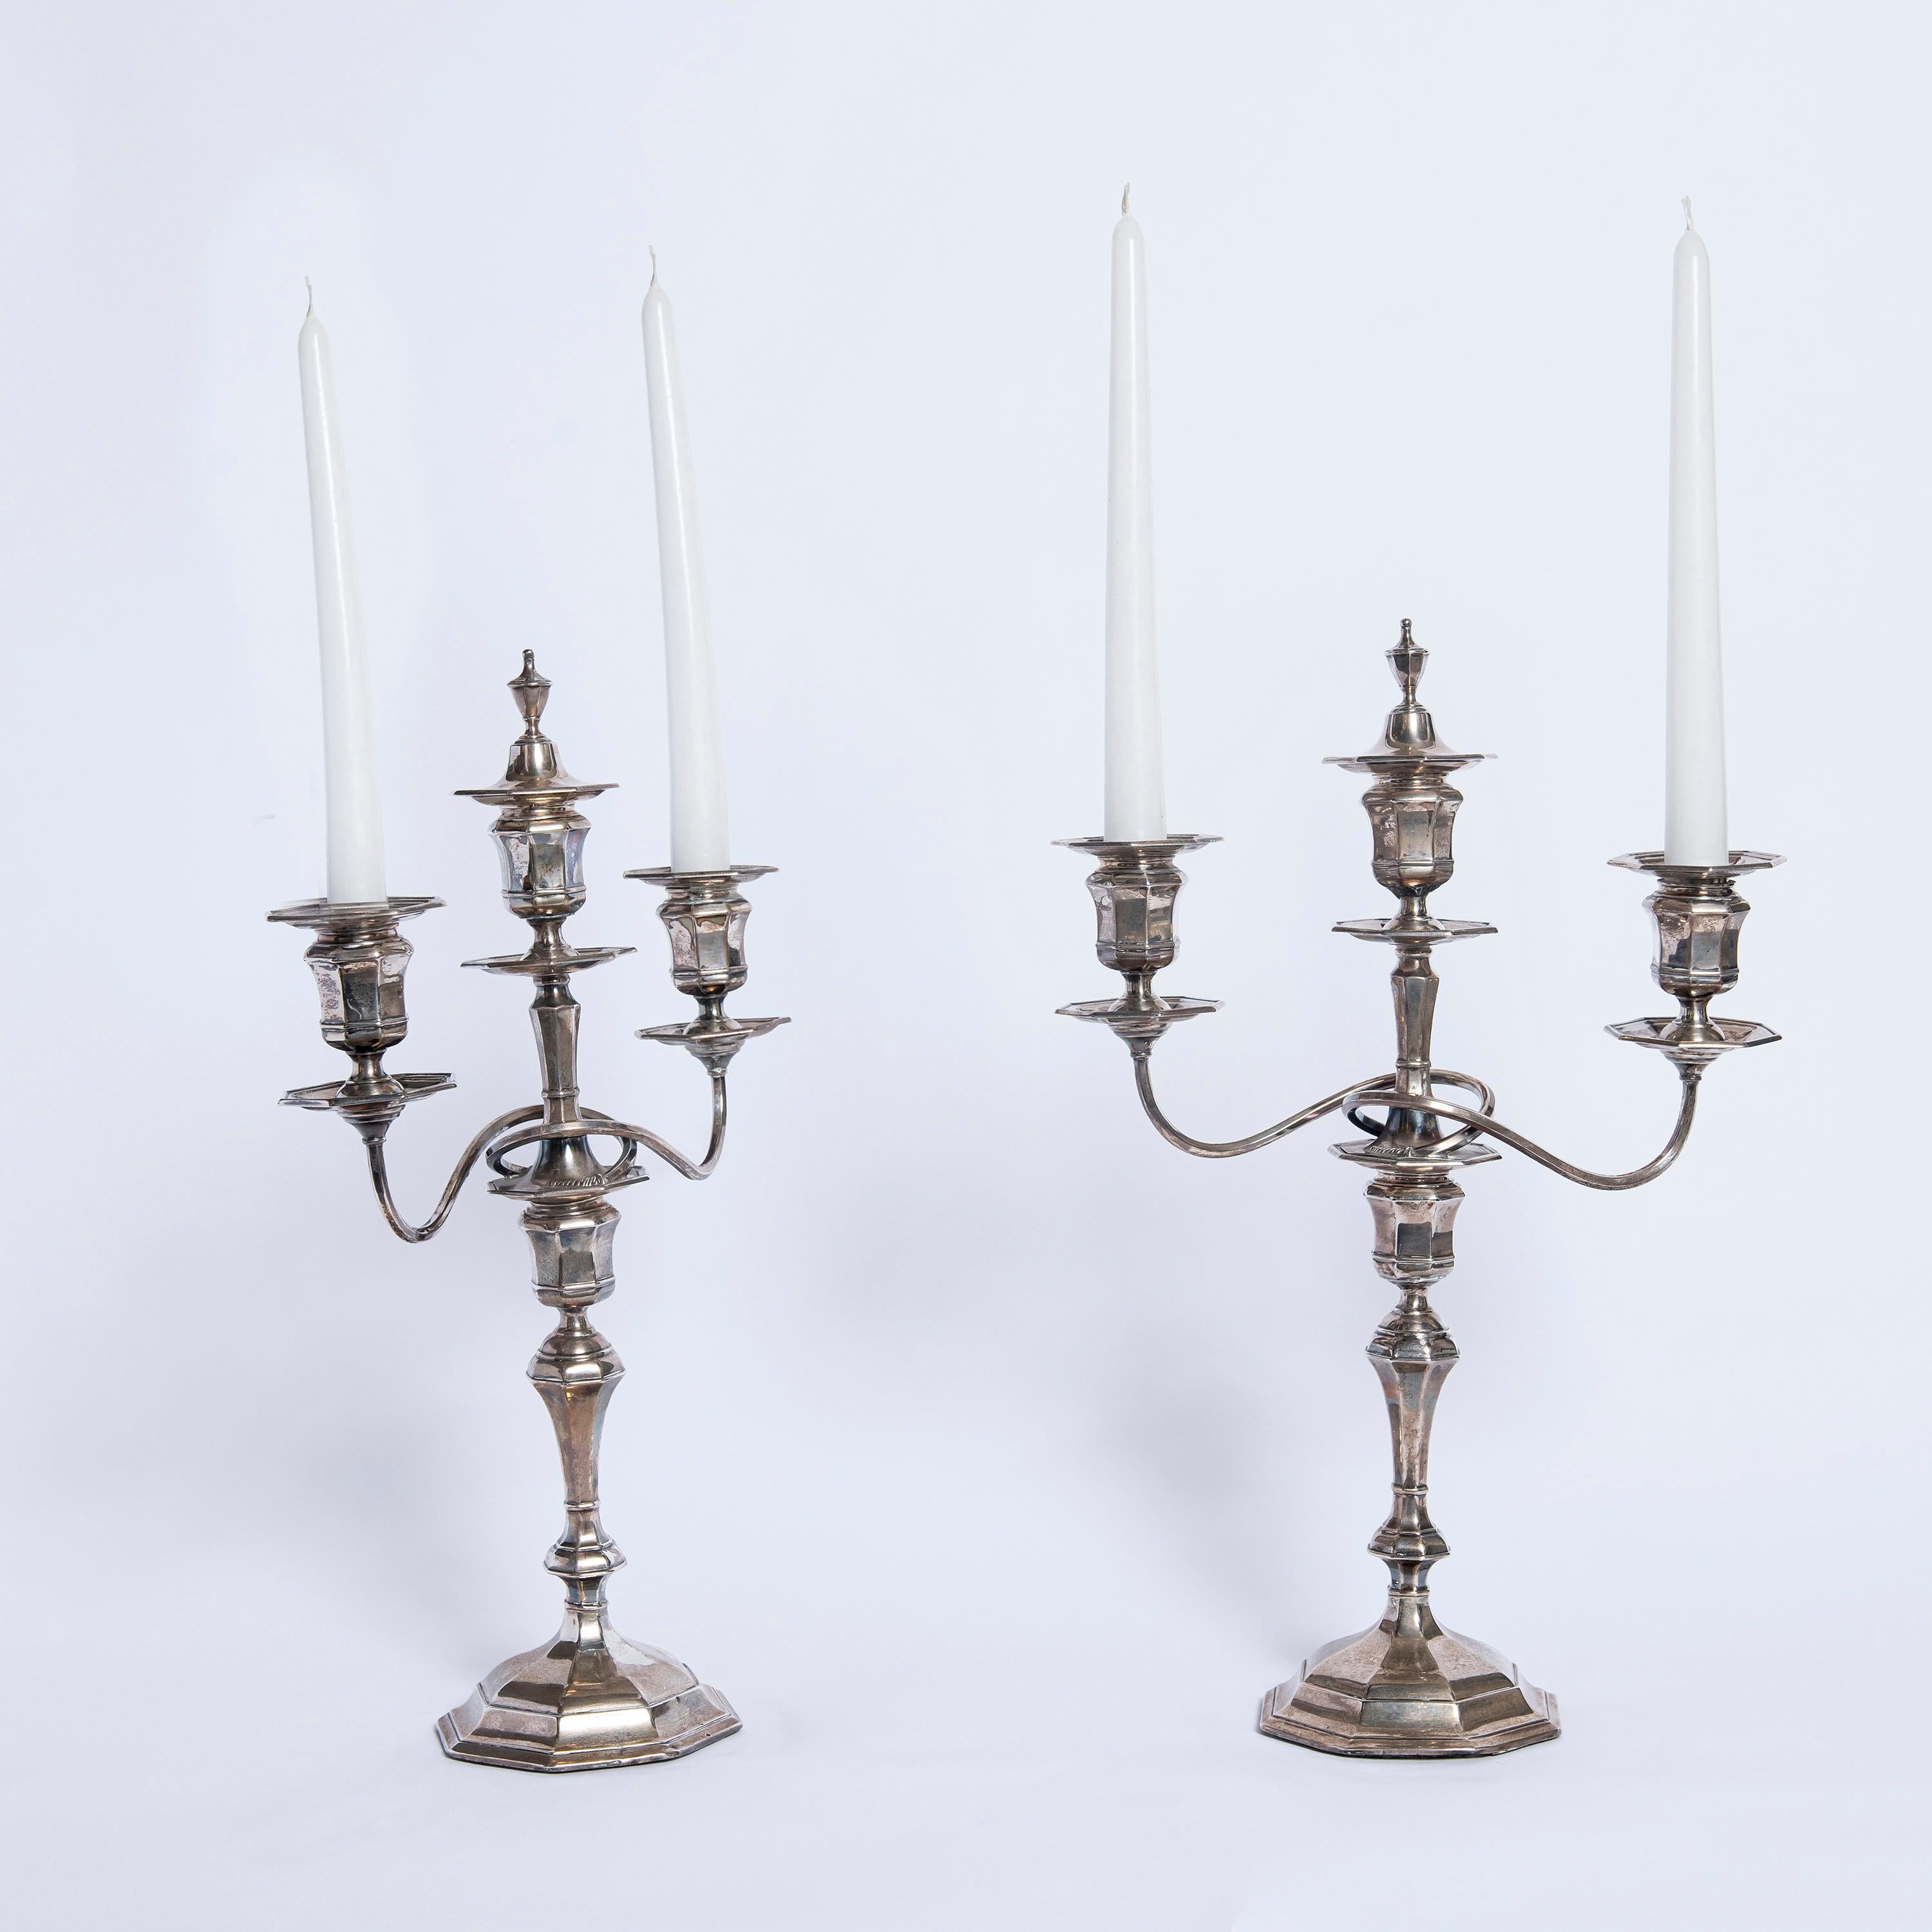 Pair of silver candelabras sealed William Hutton & Sons Ltd., England, 1920.